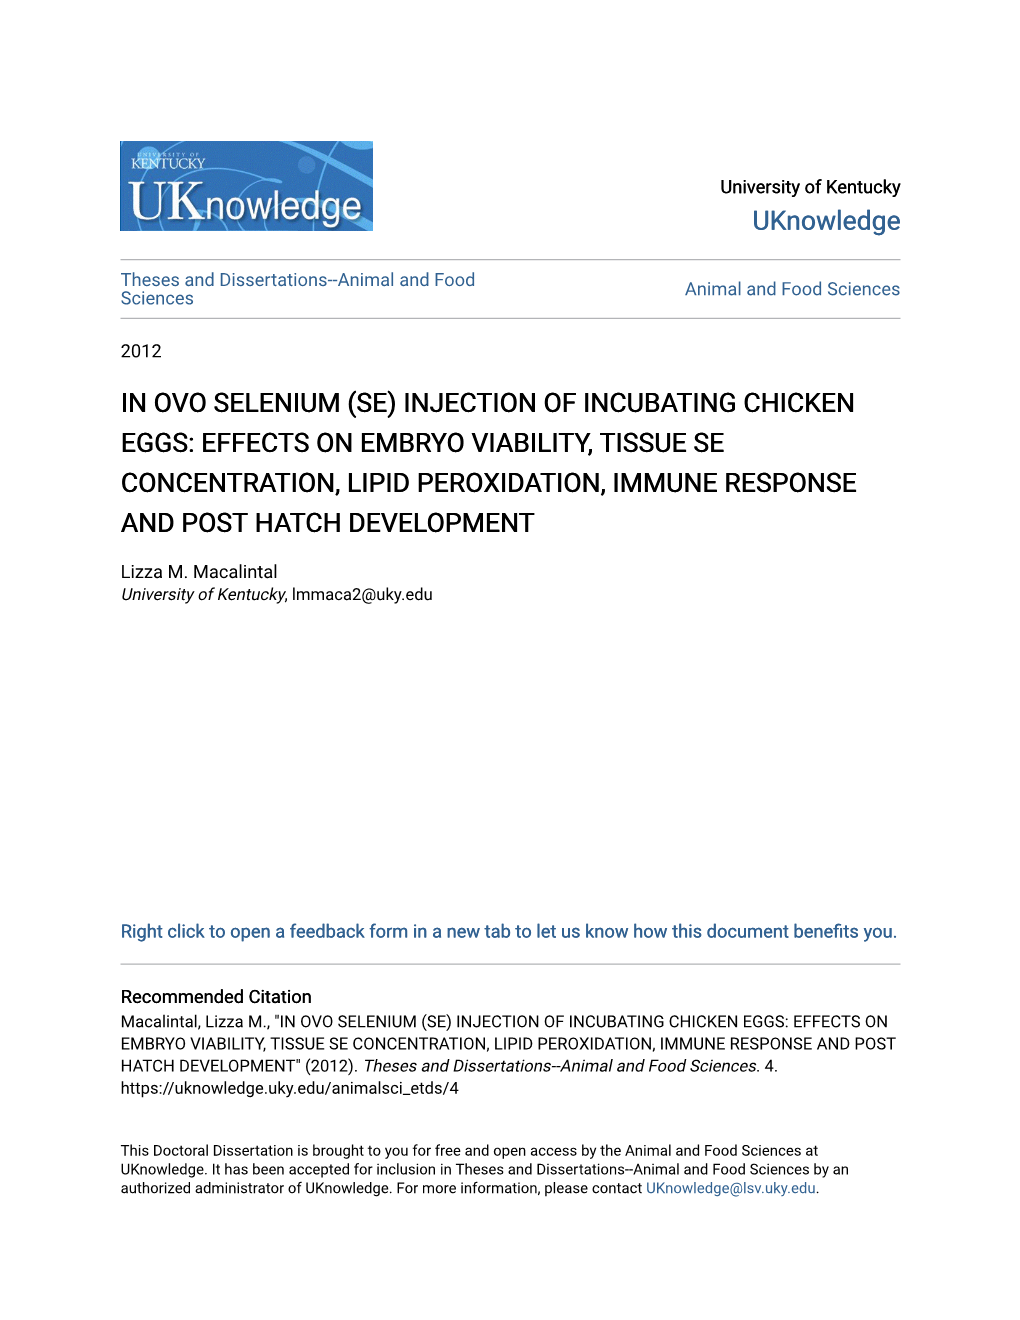 Injection of Incubating Chicken Eggs: Effects on Embryo Viability, Tissue Se Concentration, Lipid Peroxidation, Immune Response and Post Hatch Development